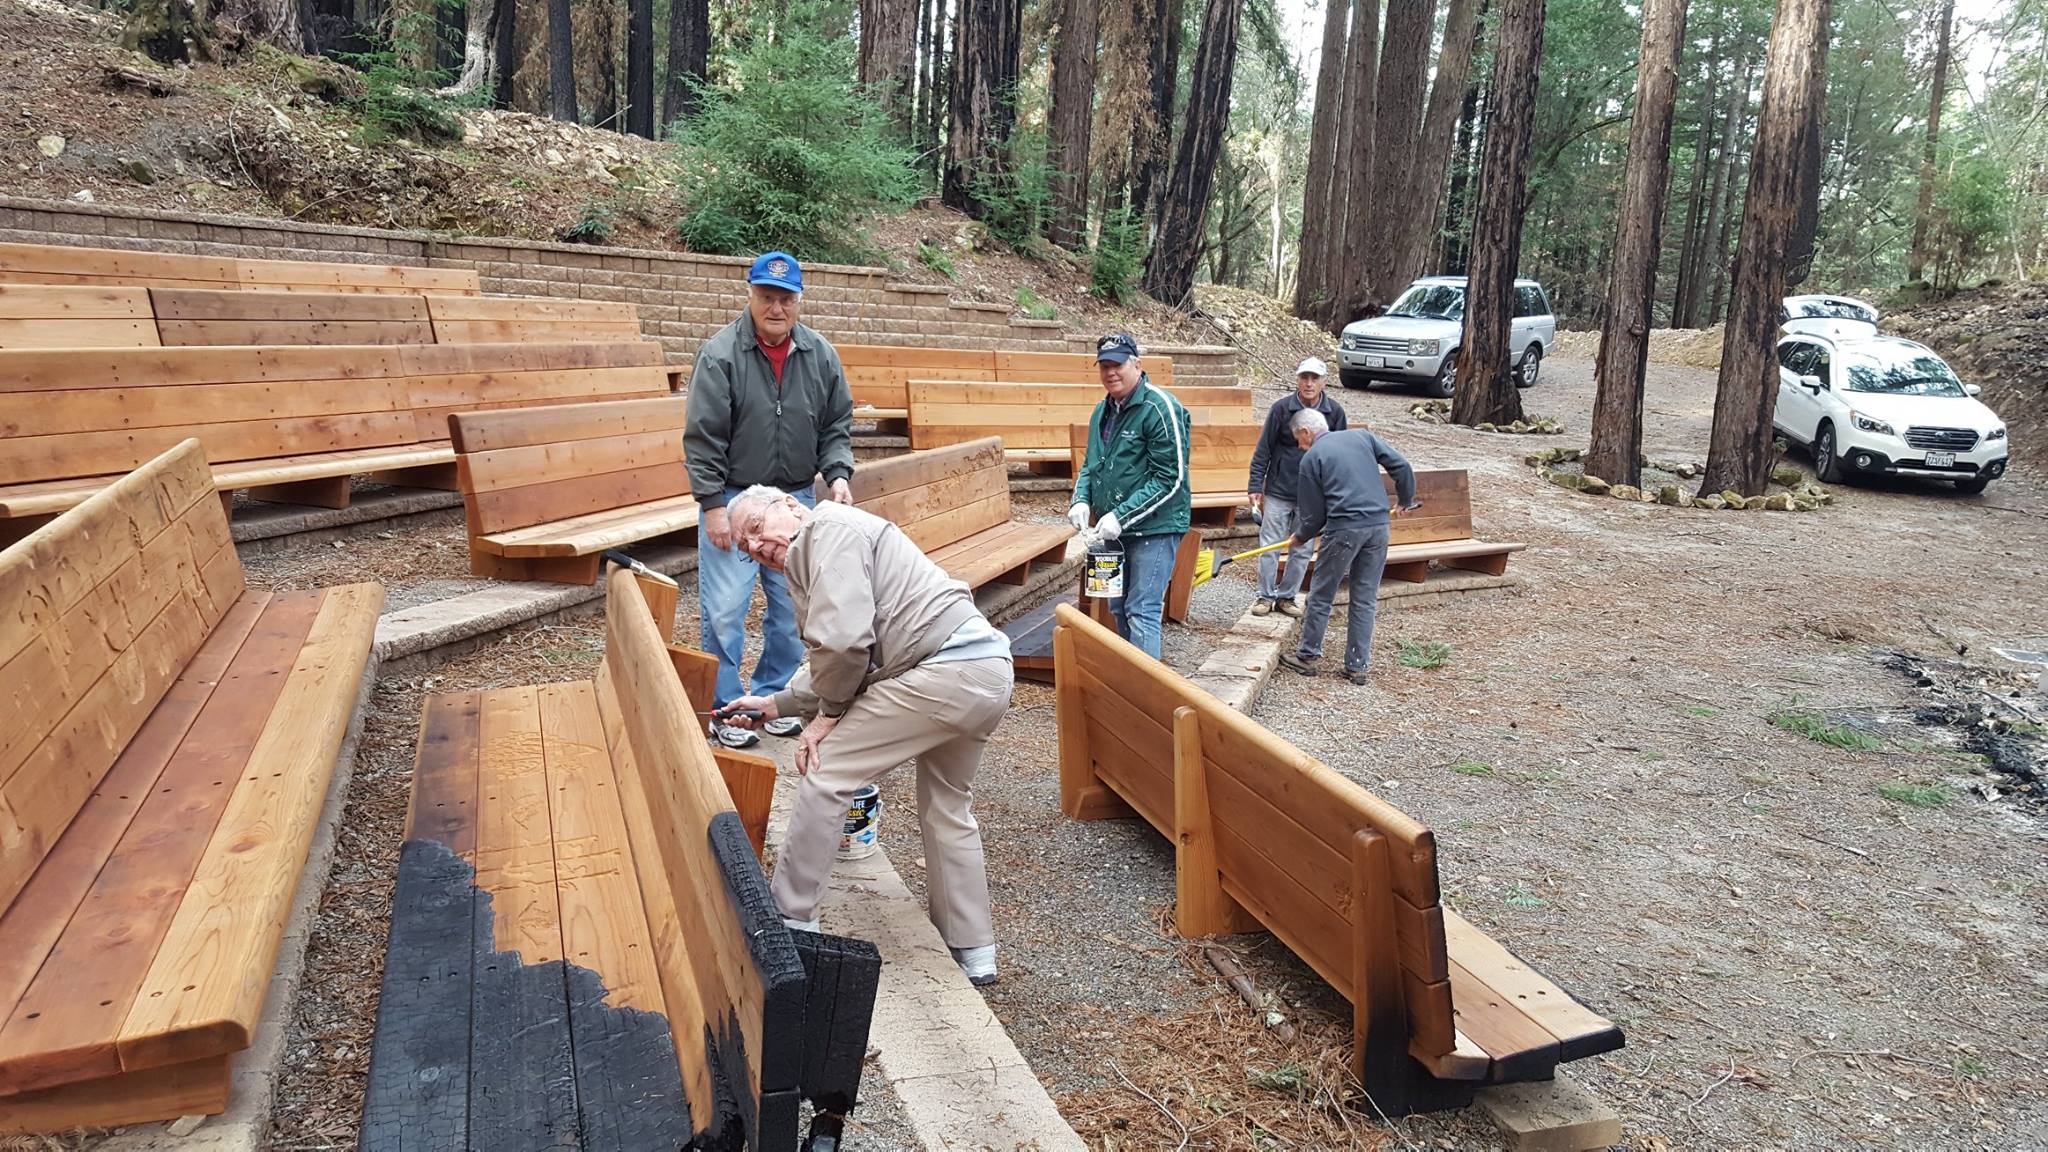 Our friends from the Napa Kiwanis Club put a protective coating on the benches in the Redwood Grove Theater to prevent rot. Some of the benches are charred, a reminder of the October fires in Napa.